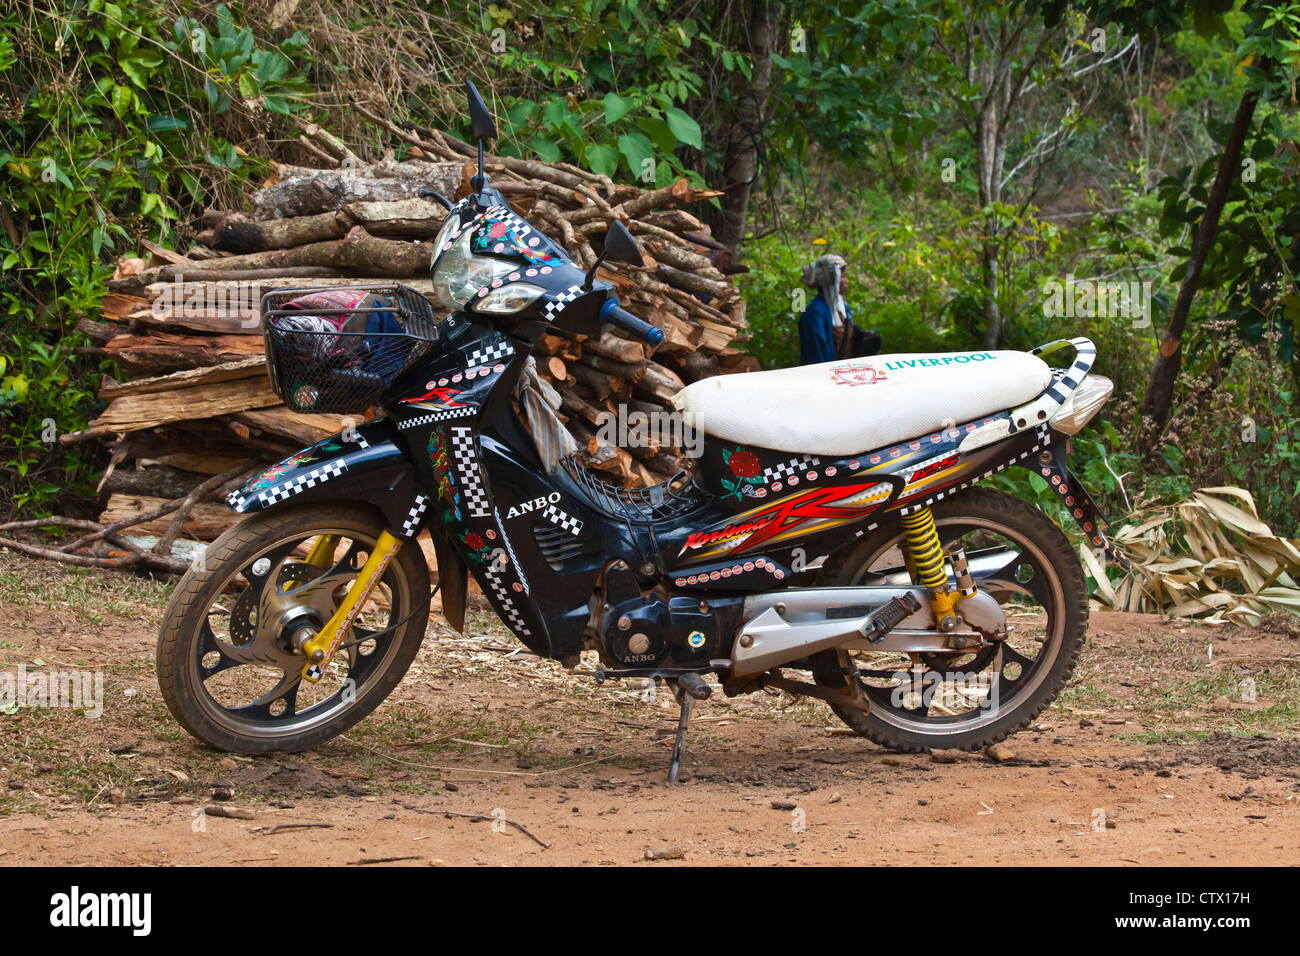 Small MOTORCYCLES have become a major form of transportation - KENGTUNG or KYAINGTONG - MYANMAR Stock Photo